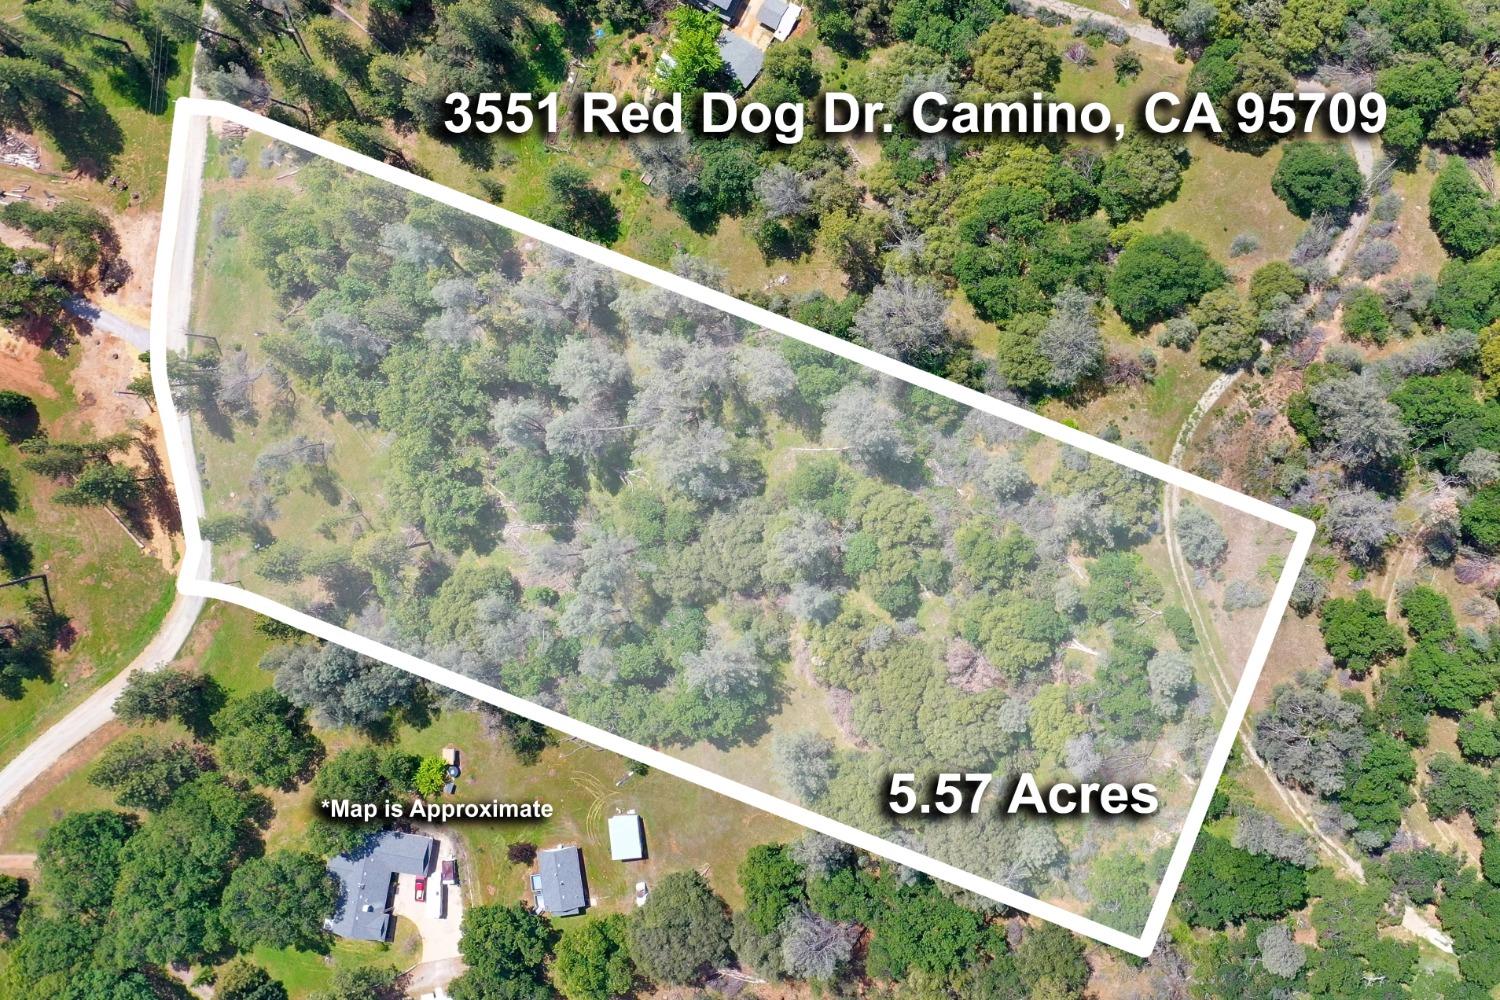 Thinking of building a home and want a peaceful setting? This parcel is located in the small Gold Strike subdivision on RED DOG DR In beautiful Camino. Just minutes to Apple Hill without the traffic, 15 minutes to Placerville, minutes to many award winning wineries and about 1 hour to Tahoe!